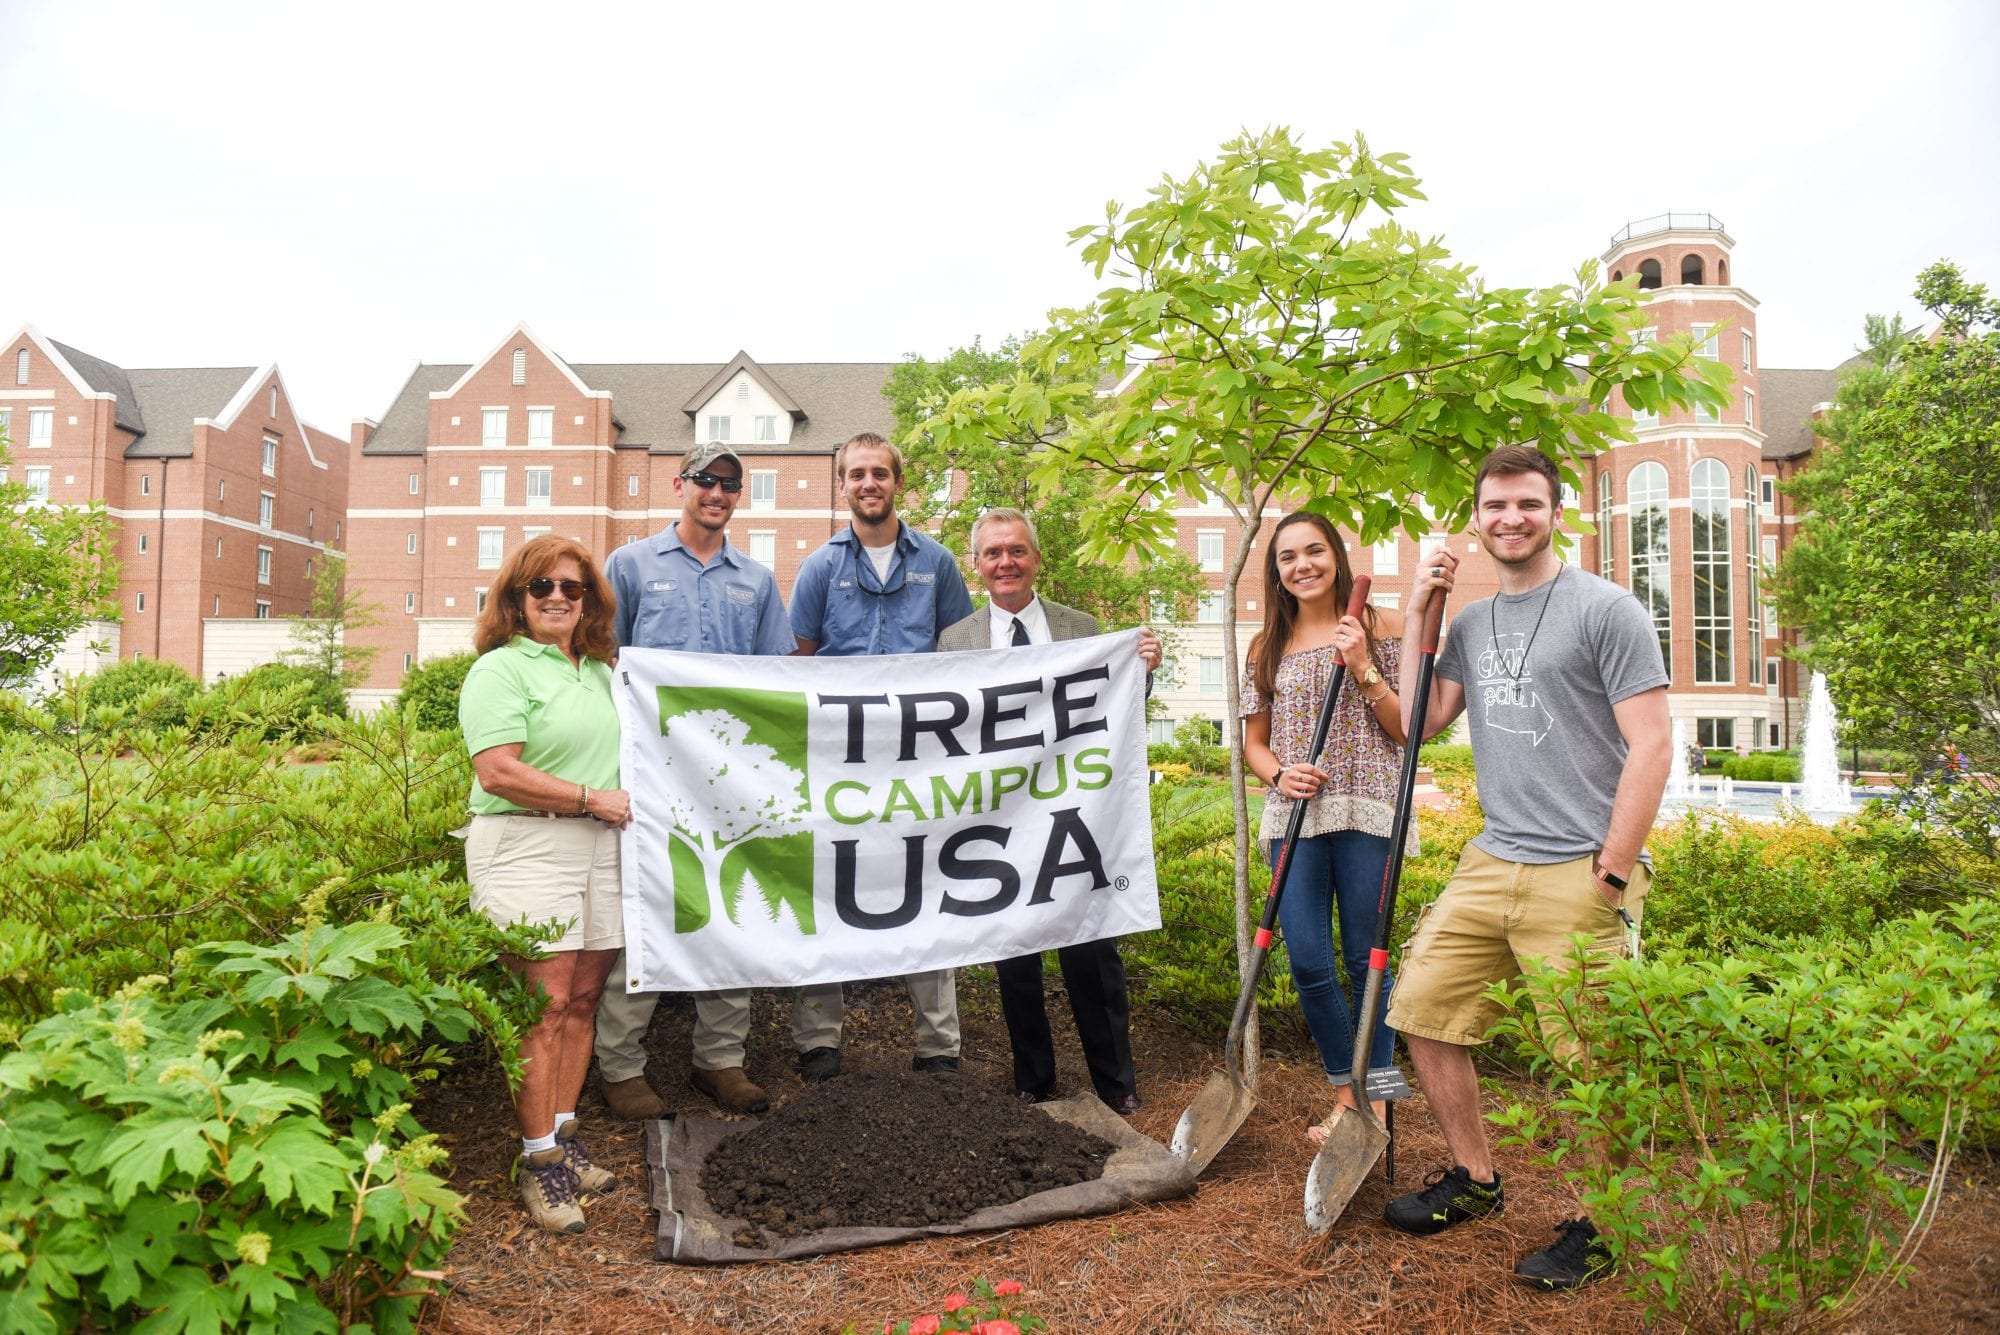 Arbor Day Foundation Recognizes Belmont as a Tree Campus USA® Belmont